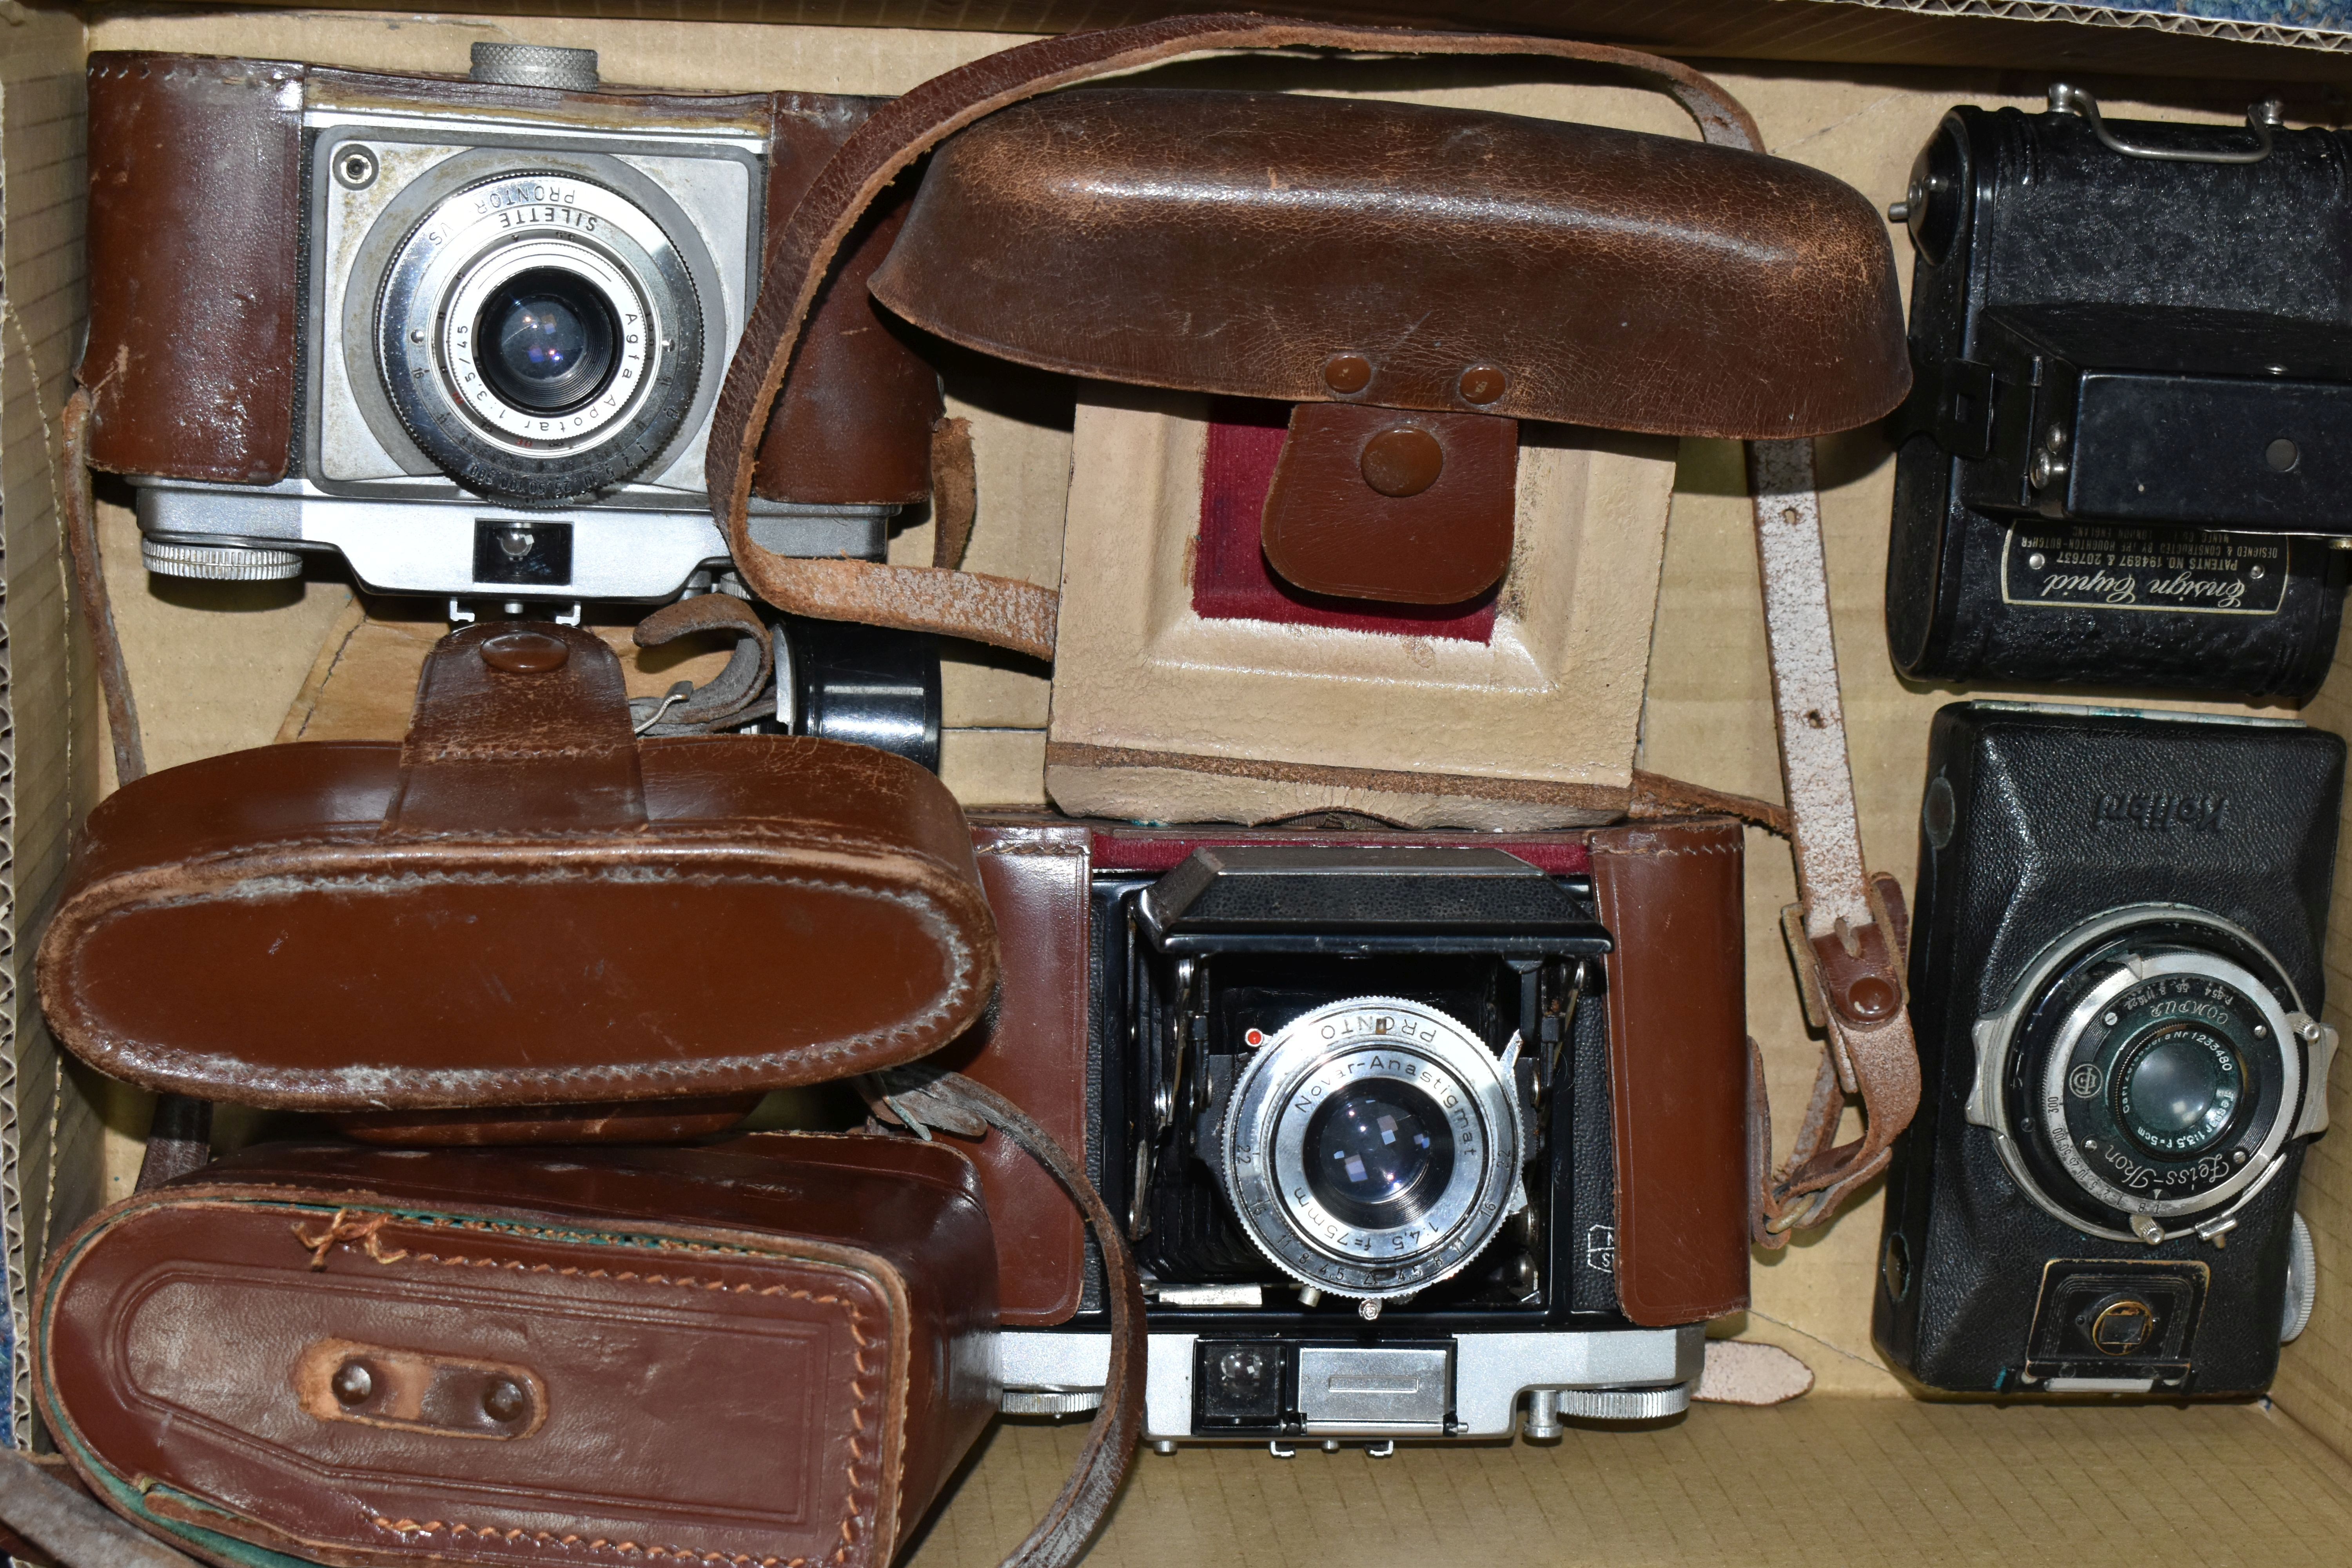 ONE BOX OF VINTAGE CAMERAS, to include an Ensign 'Cupid' , a Zeiss-Ikon Kolibri compact Compur